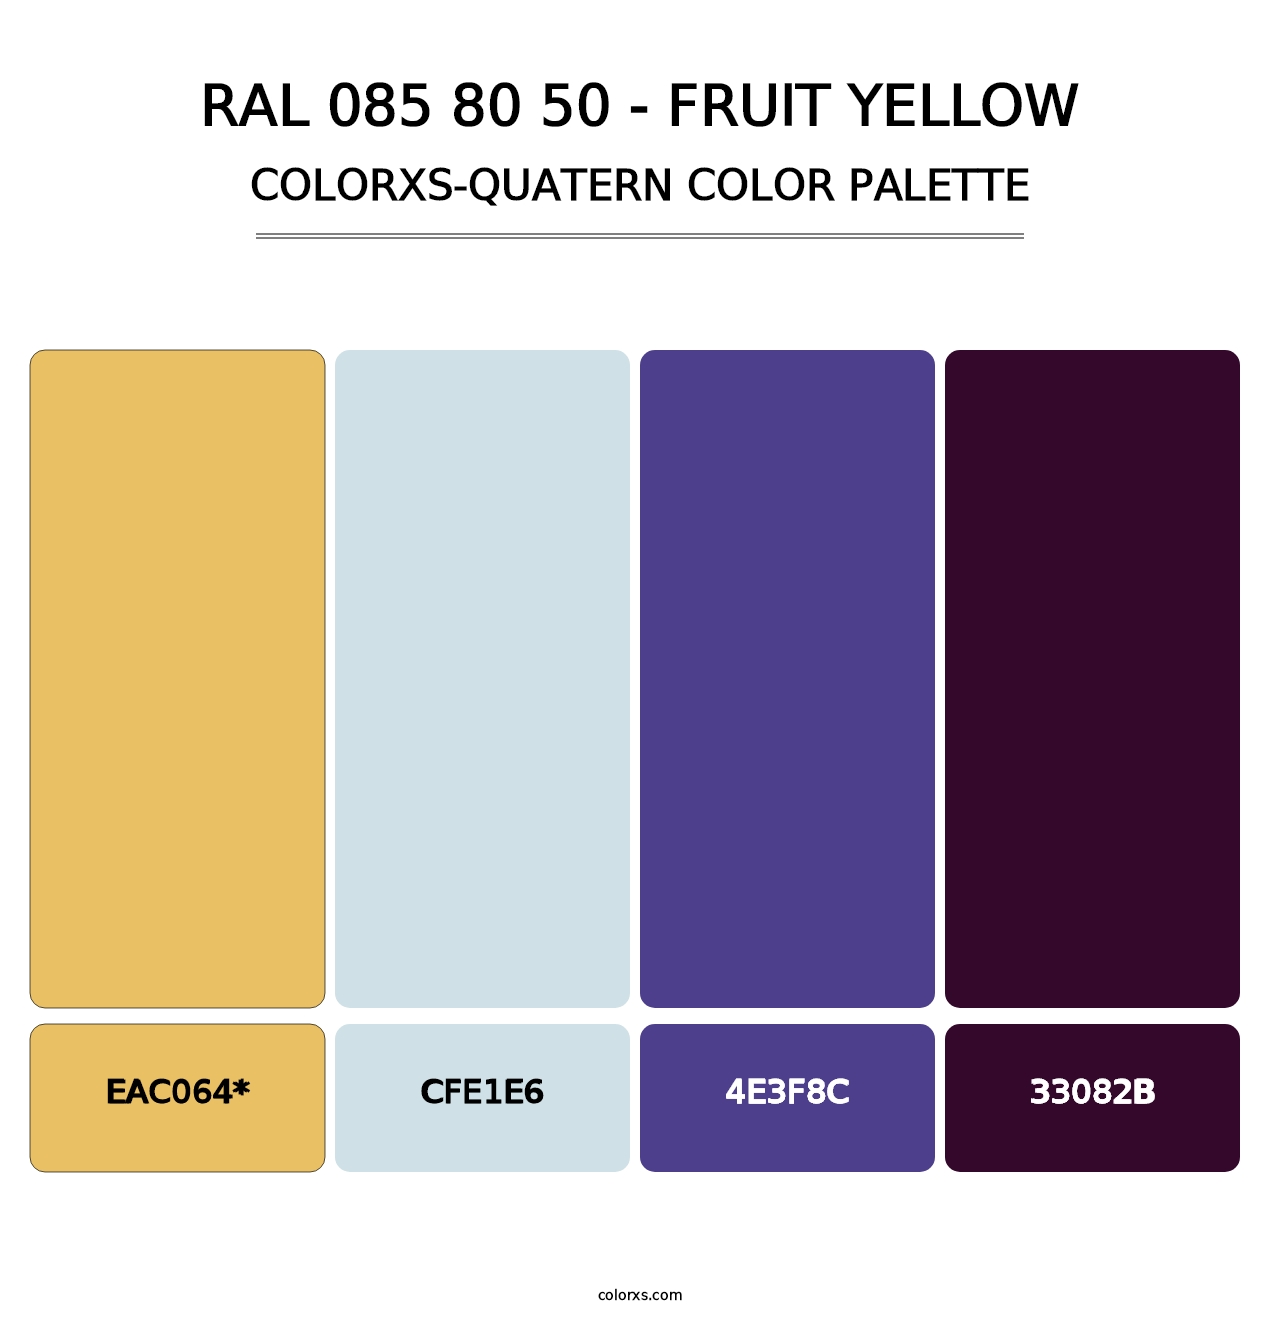 RAL 085 80 50 - Fruit Yellow - Colorxs Quatern Palette